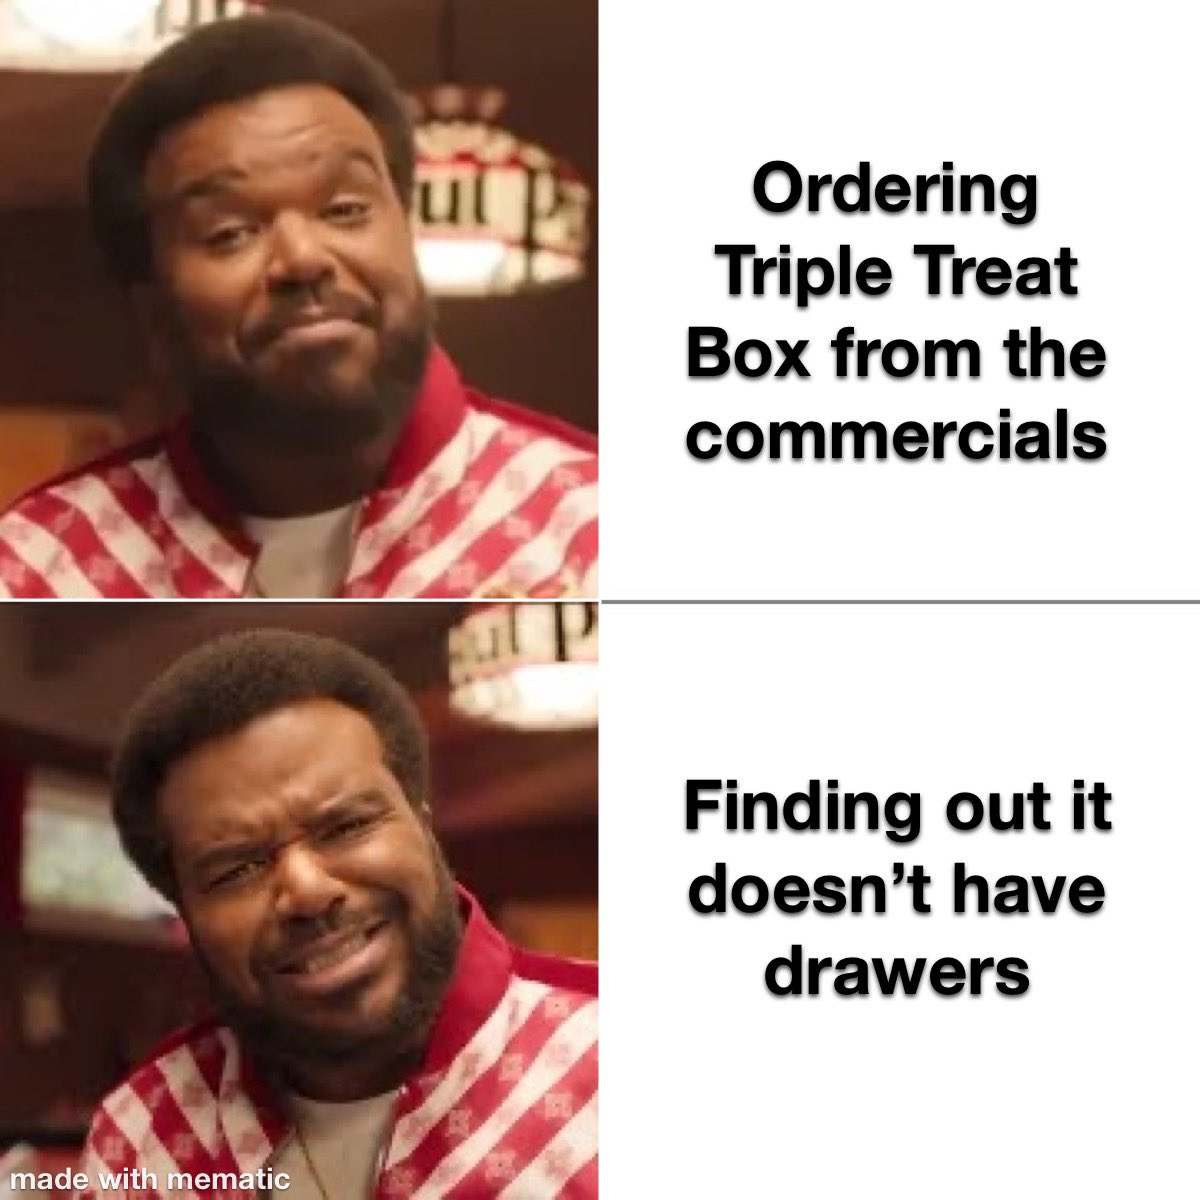 .@Bentnews just saw your report on the @pizzahut Big New Yorker Pizza returning but the real news story is the false advertising of drawers in the Triple Treat Box… @CarolynBruckTV